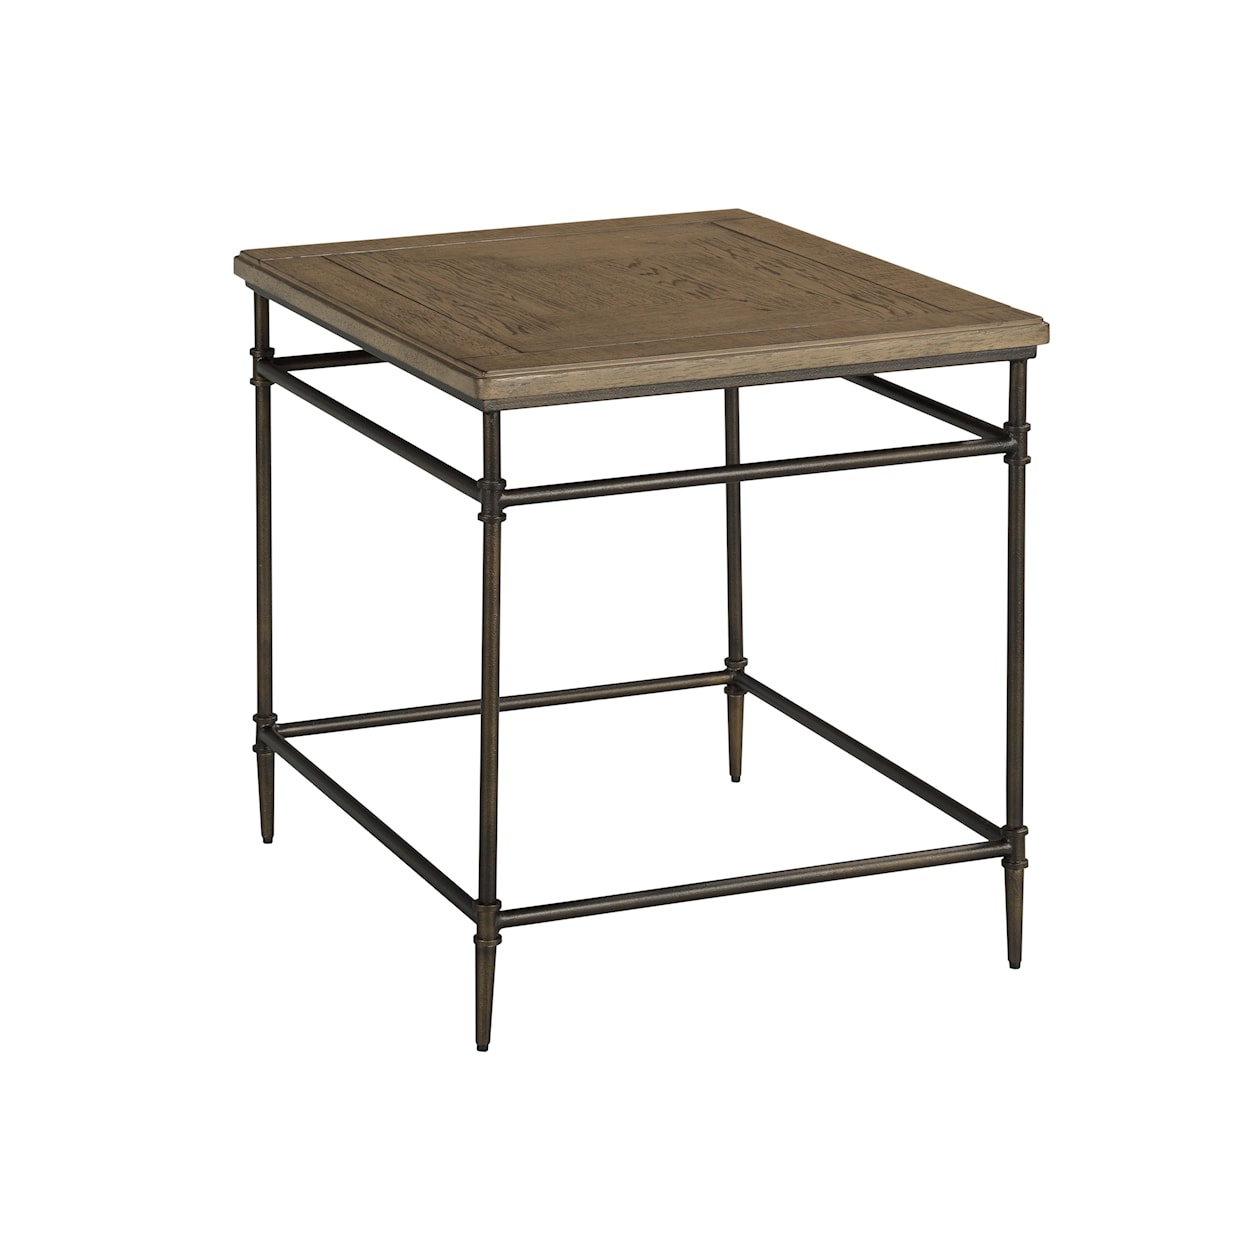 Dimensions Crossroads Rectangular End Table